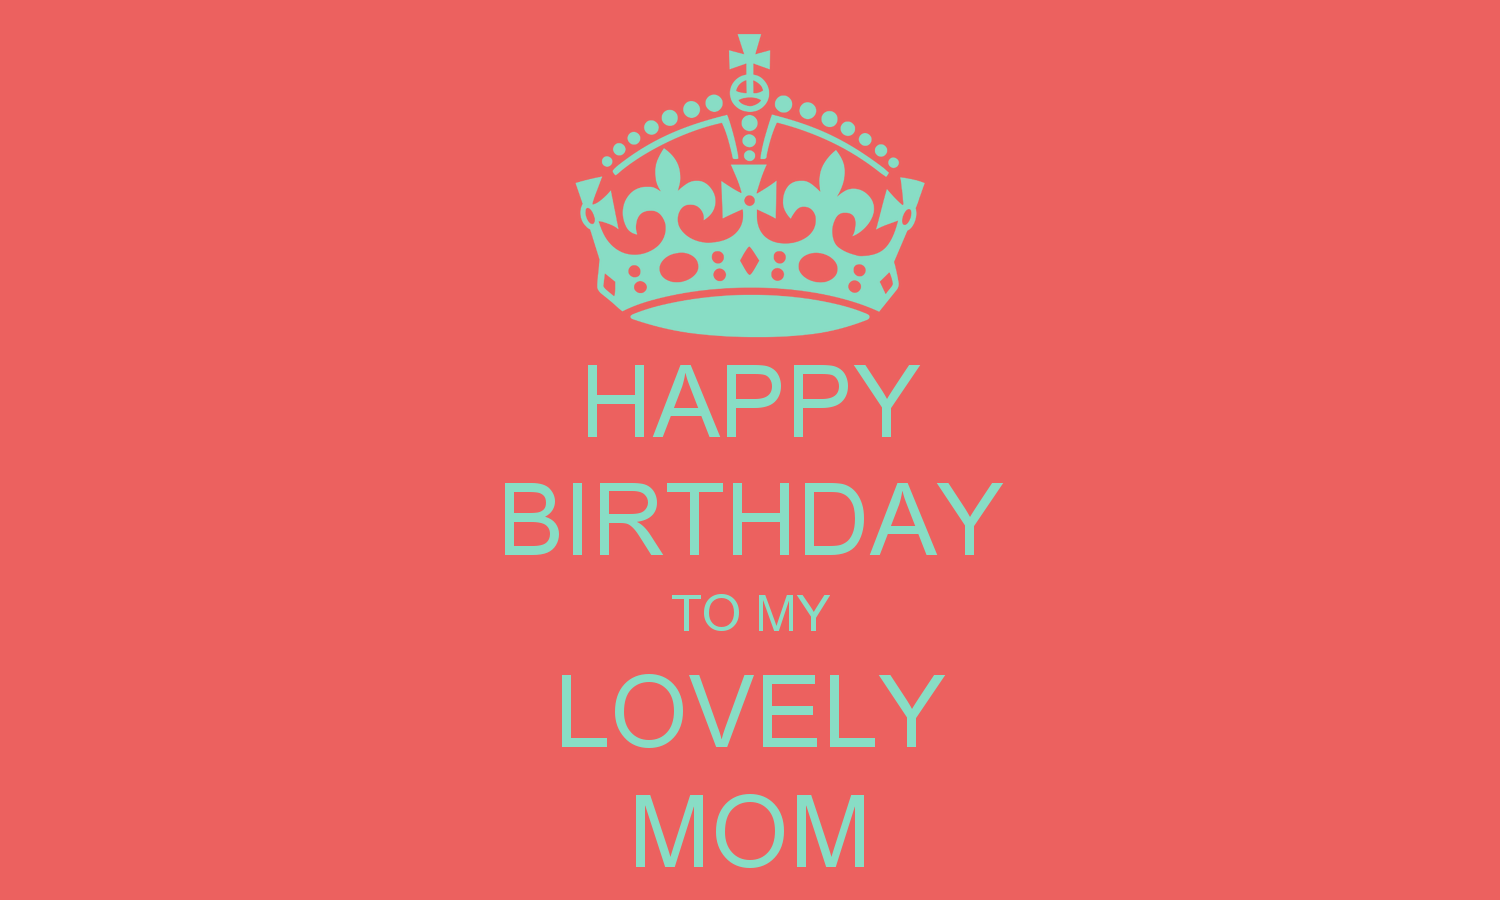 Free download cover picture twitter pic widescreen wallpaper normal wallpaper [1500x900] for your Desktop, Mobile & Tablet. Explore Happy Birthday Mom Wallpaper. Happy Birthday Wallpaper